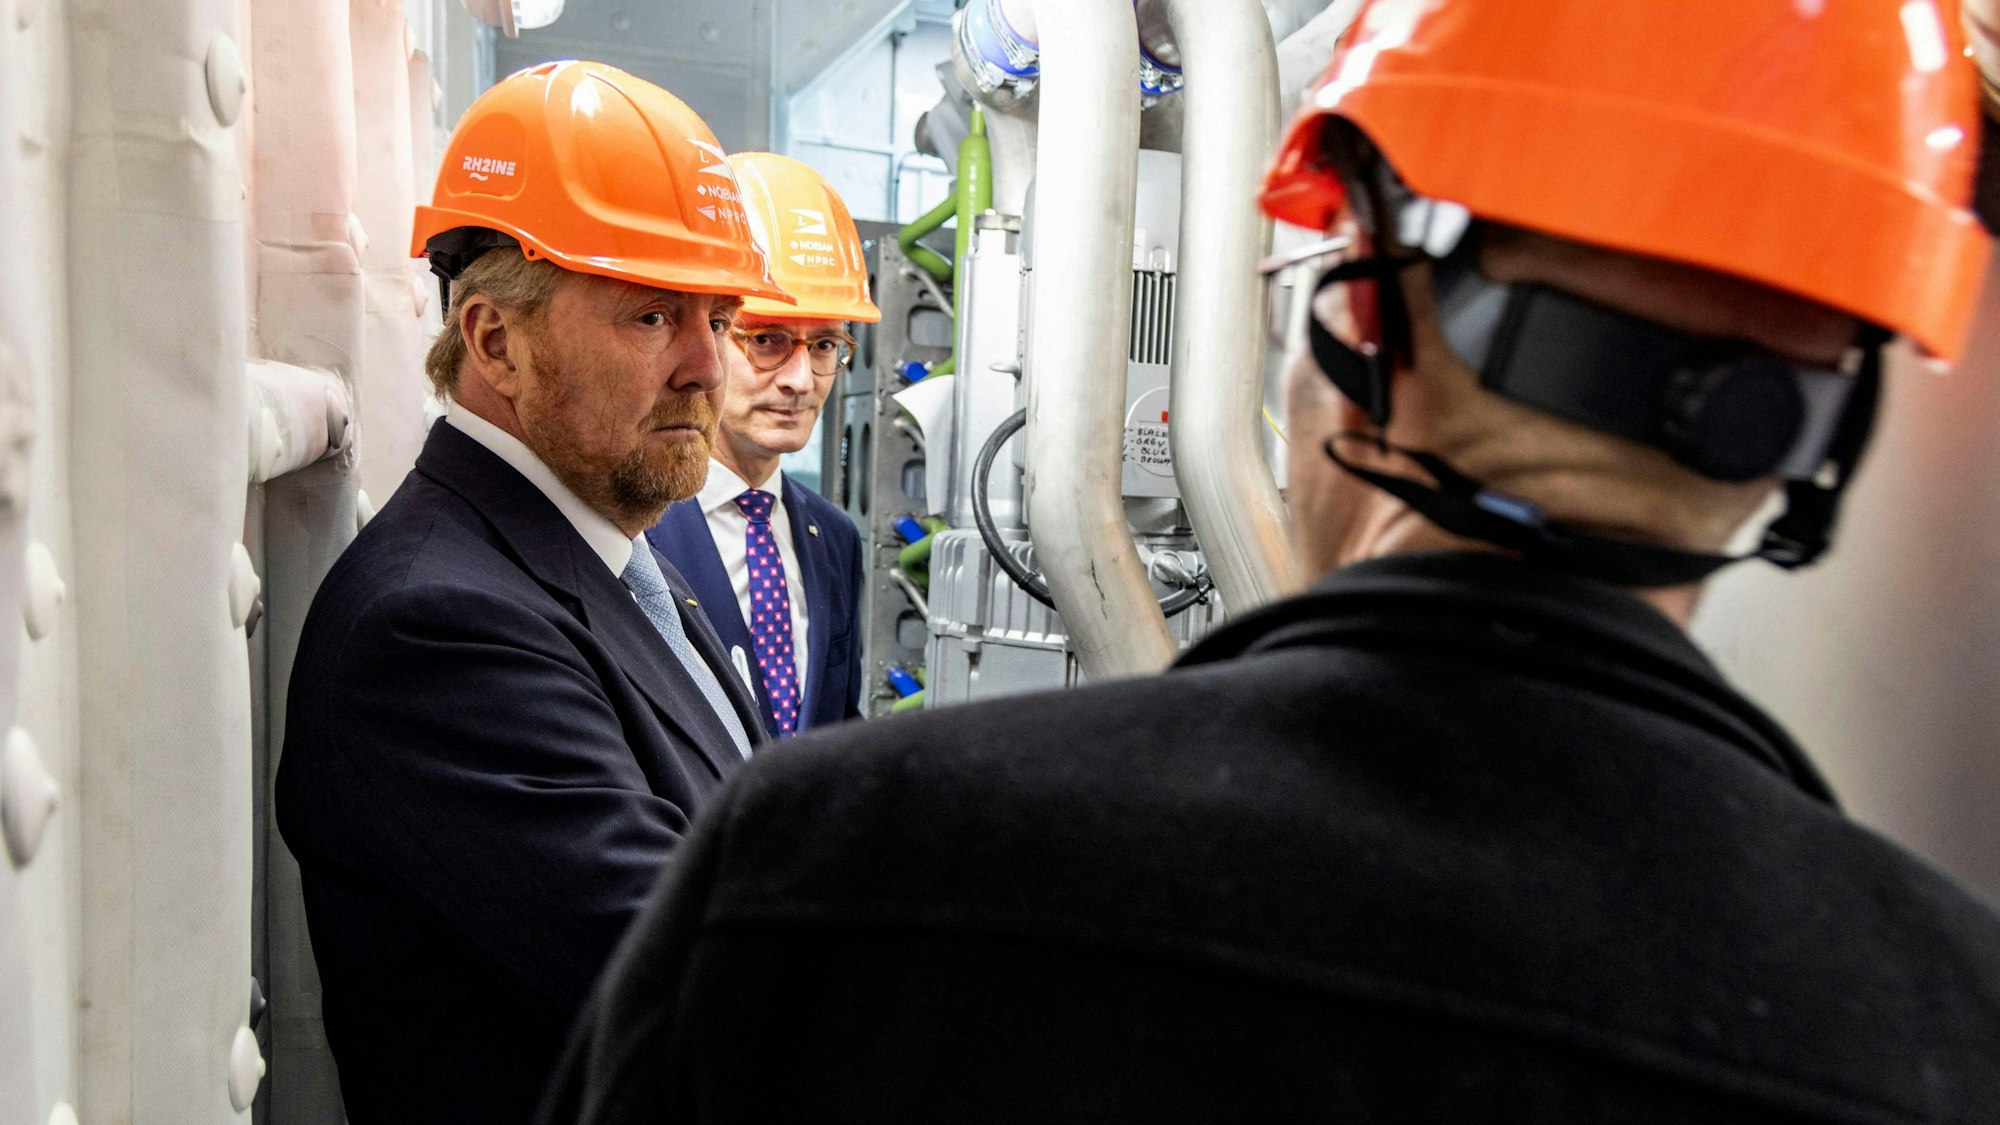 King Willem-Alexander of the Netherlands (L) and North Rhine-Westphalia's State Premier Hendrik Wuest (C) stand in the engine room of a hydrogen ship in the port of Duisburg, western Germany on November 14, 2023. The Dutch King and North Rhine-Westphalia's Prime Minister visit various companies and institutions. (Photo by Christoph Reichwein / POOL / AFP)